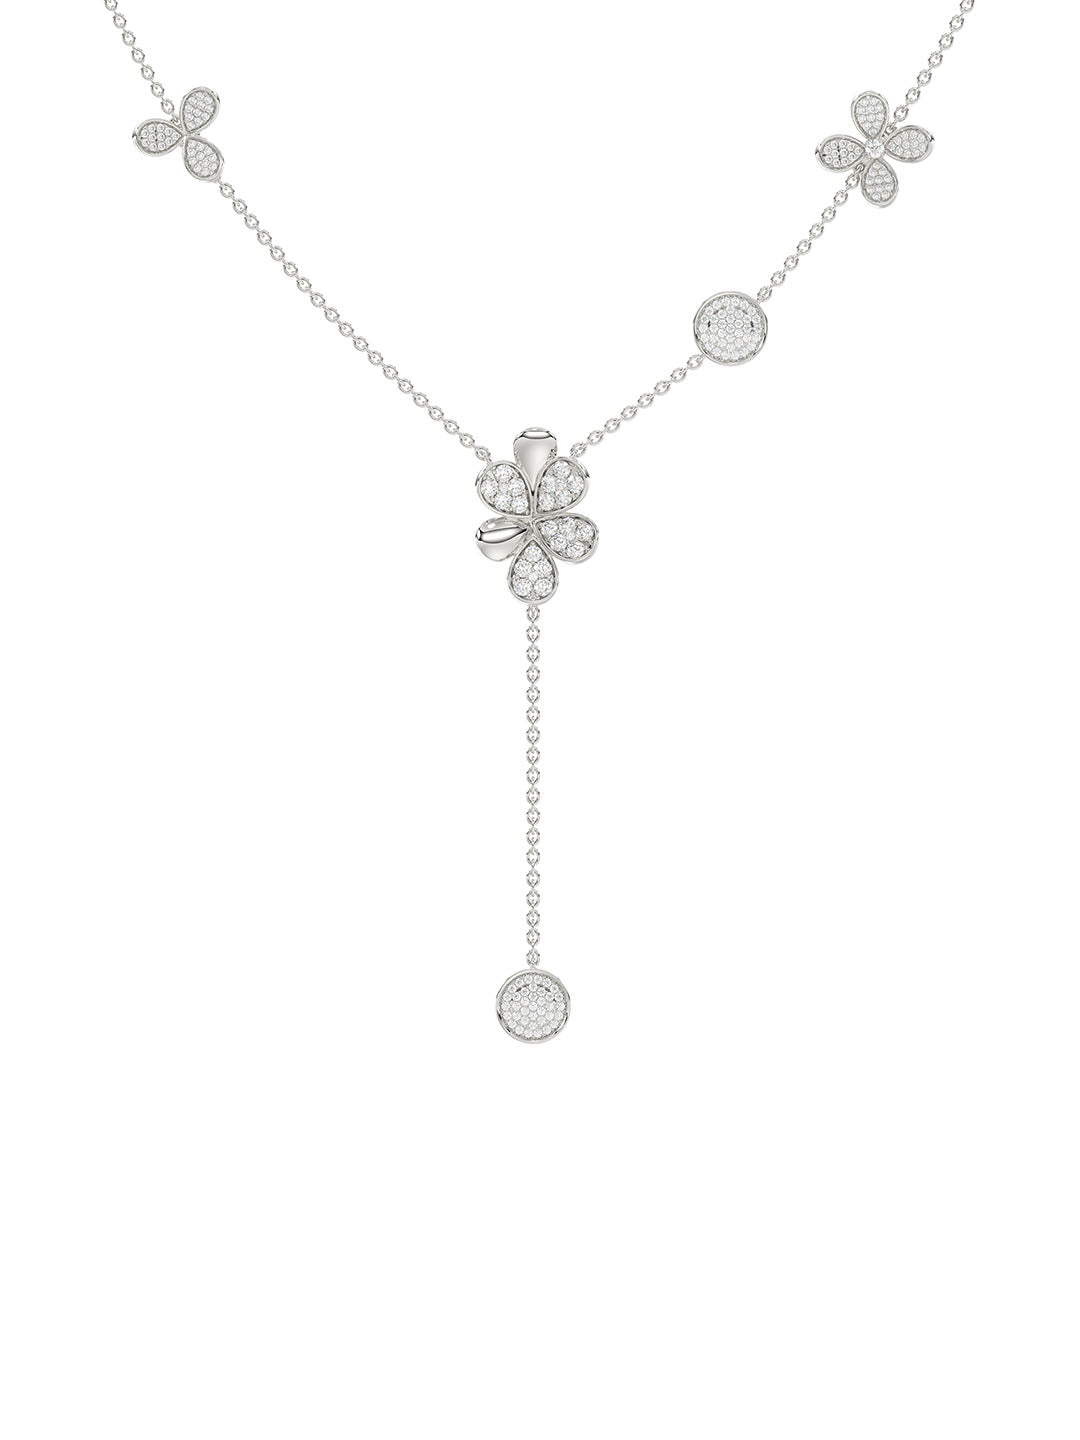 Floral White Gold Y Necklace | Marchesa